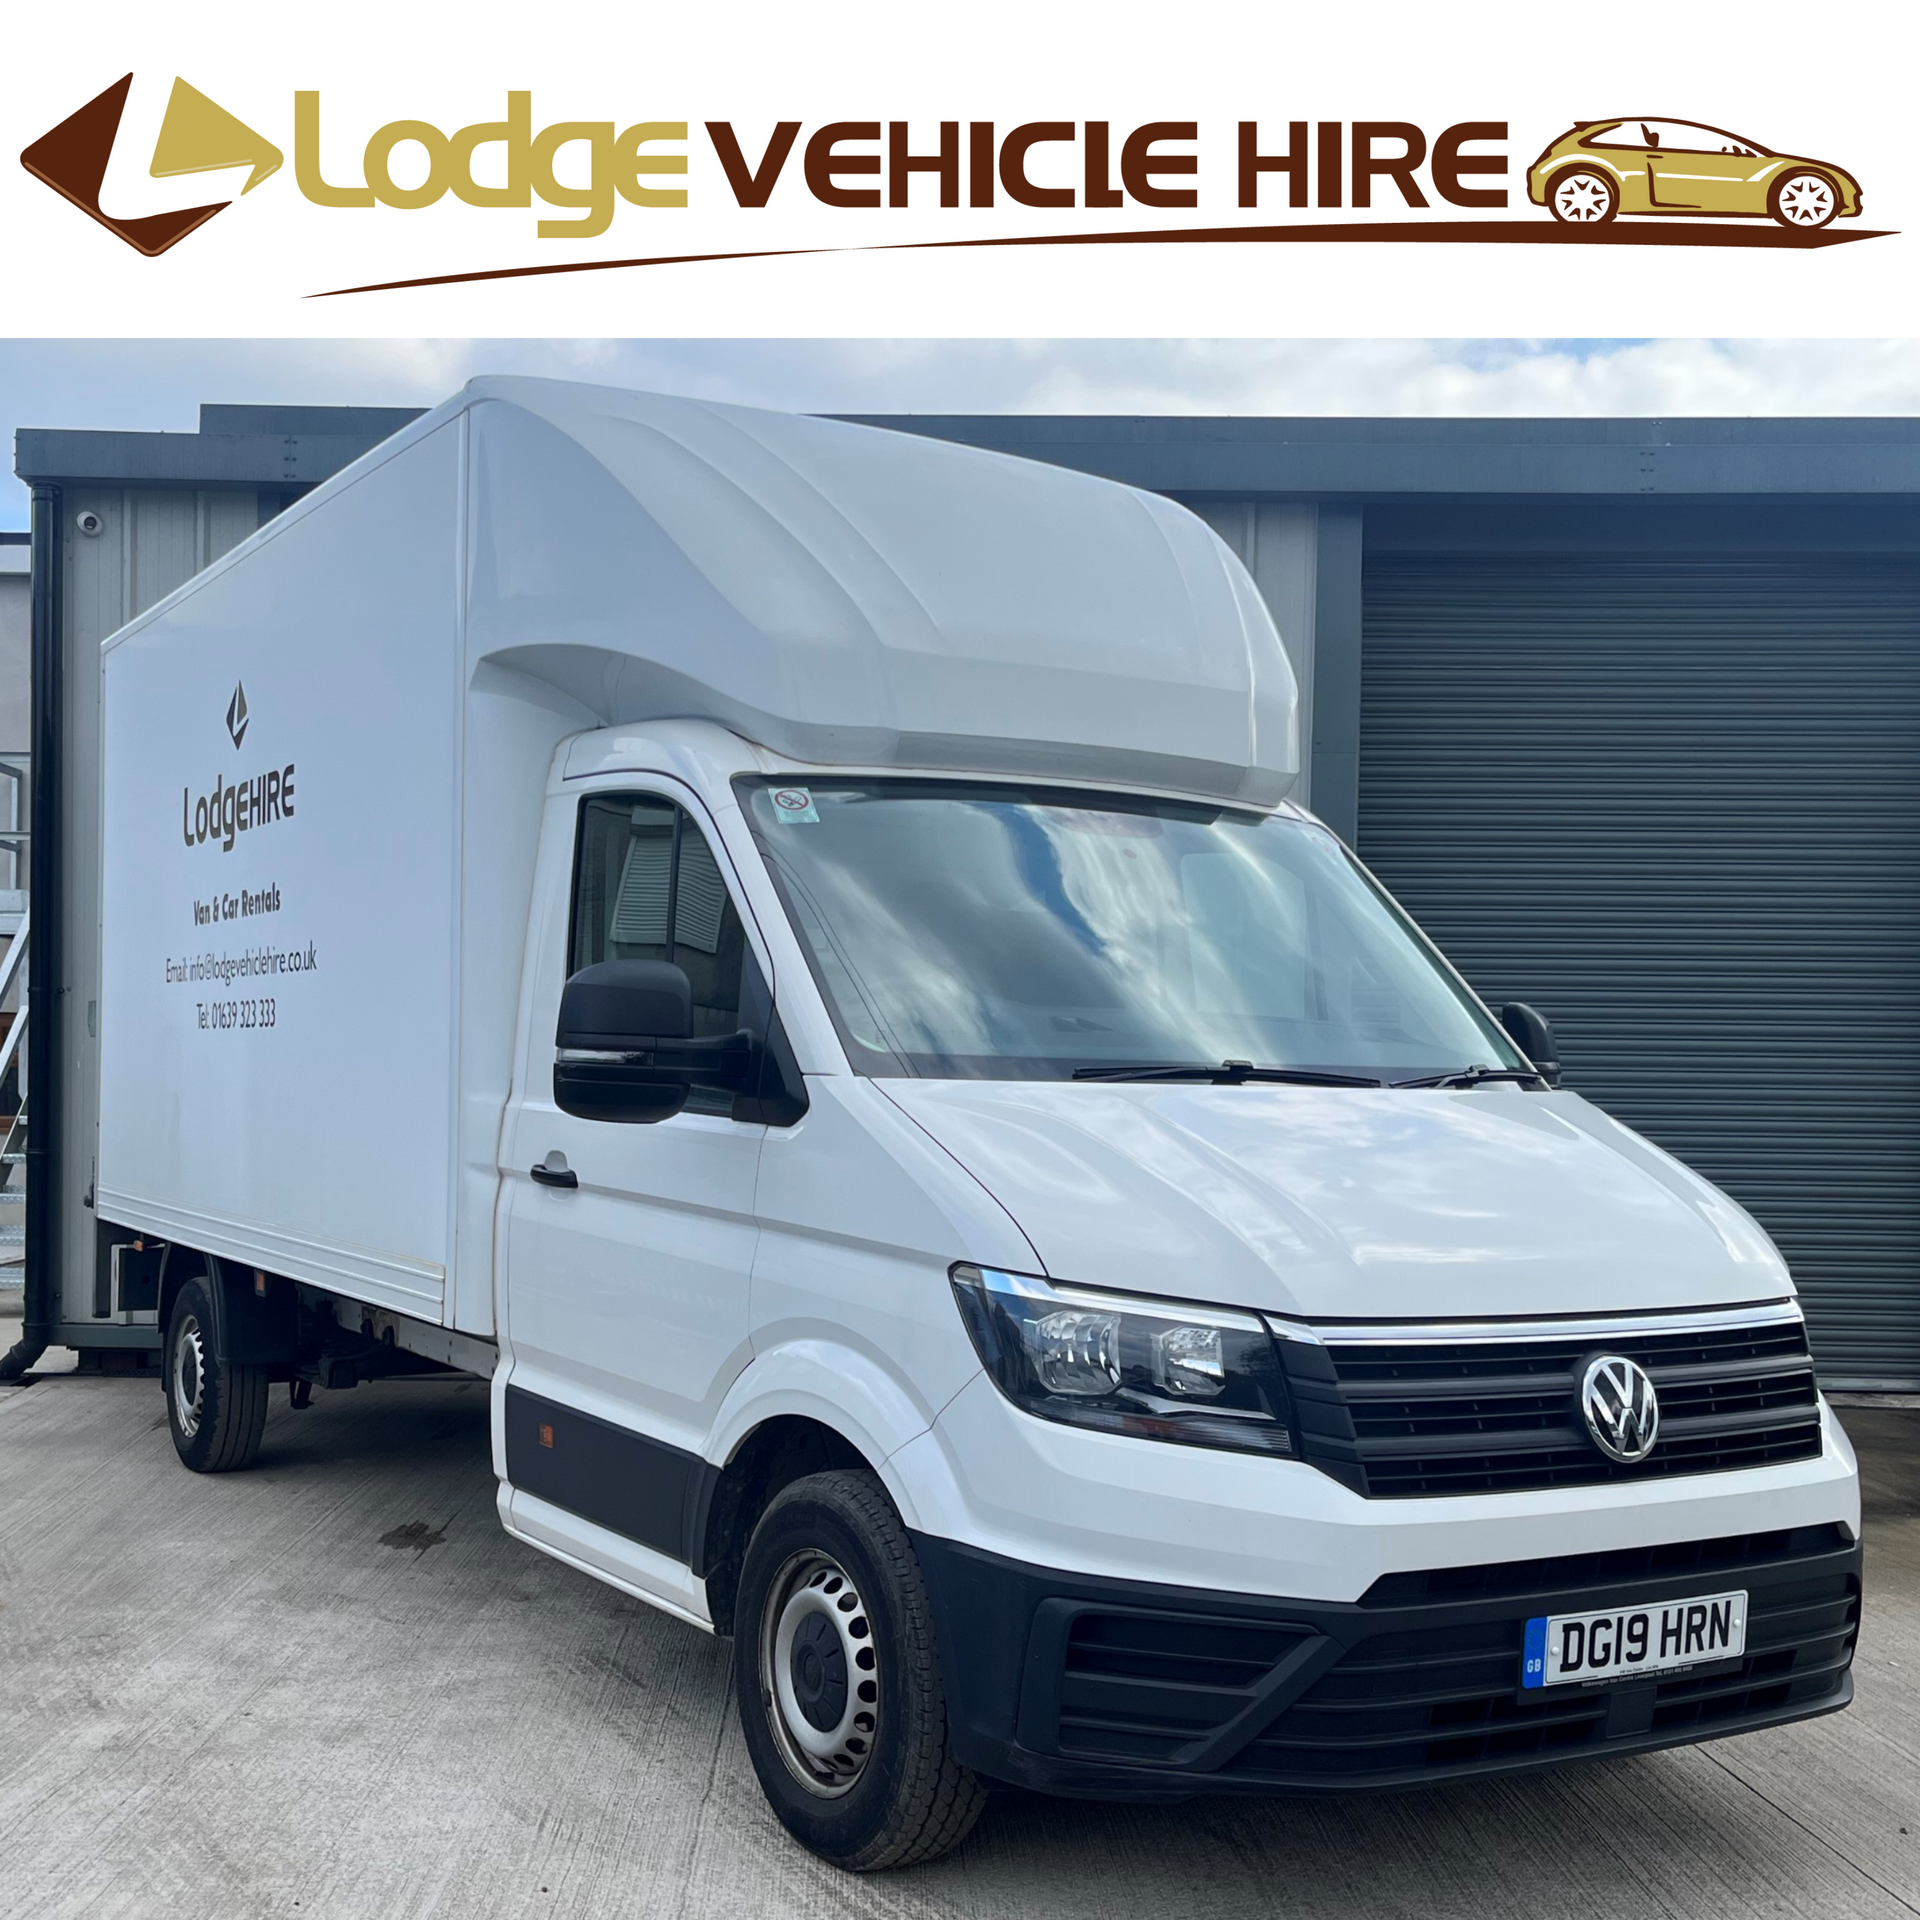 Rental vans for Luton at 77 pounds per day